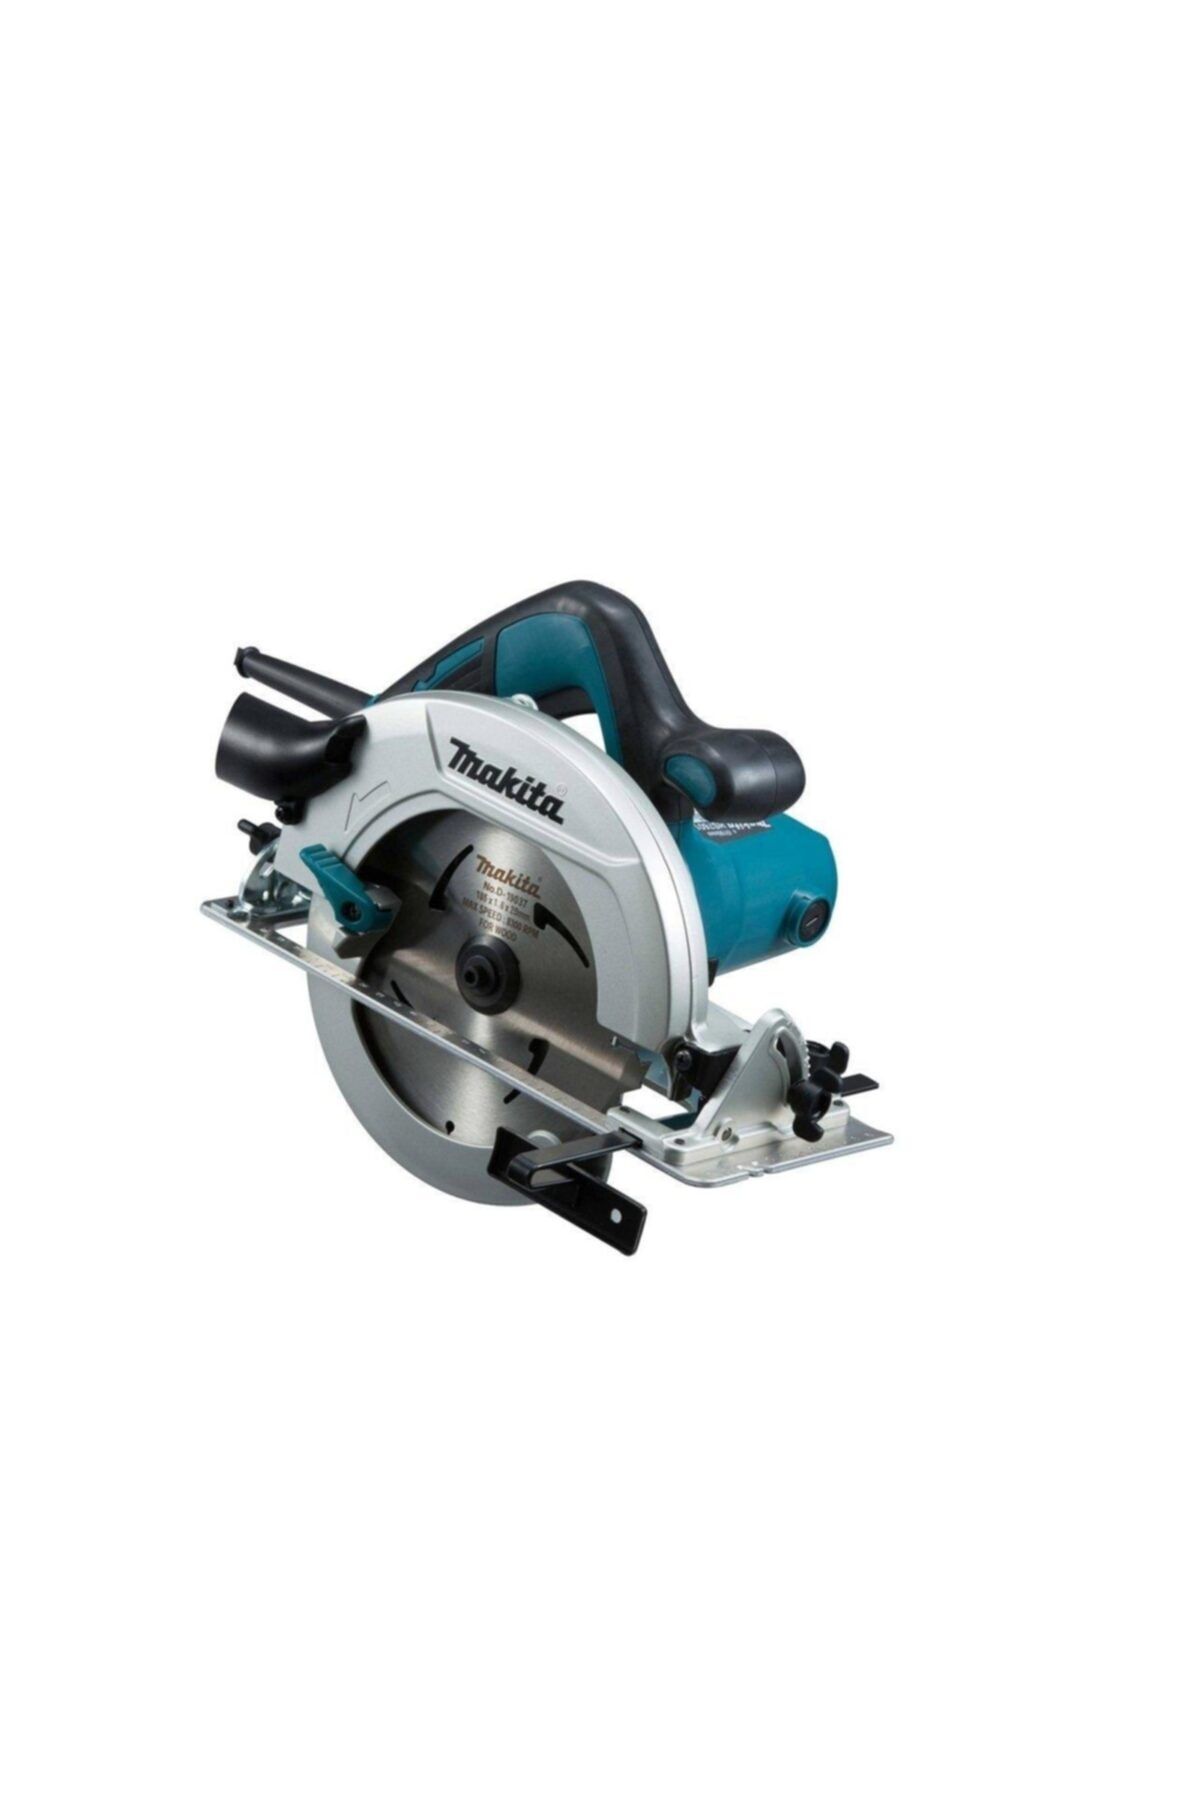 Makita Daire Testere Hs7601 190 Mm